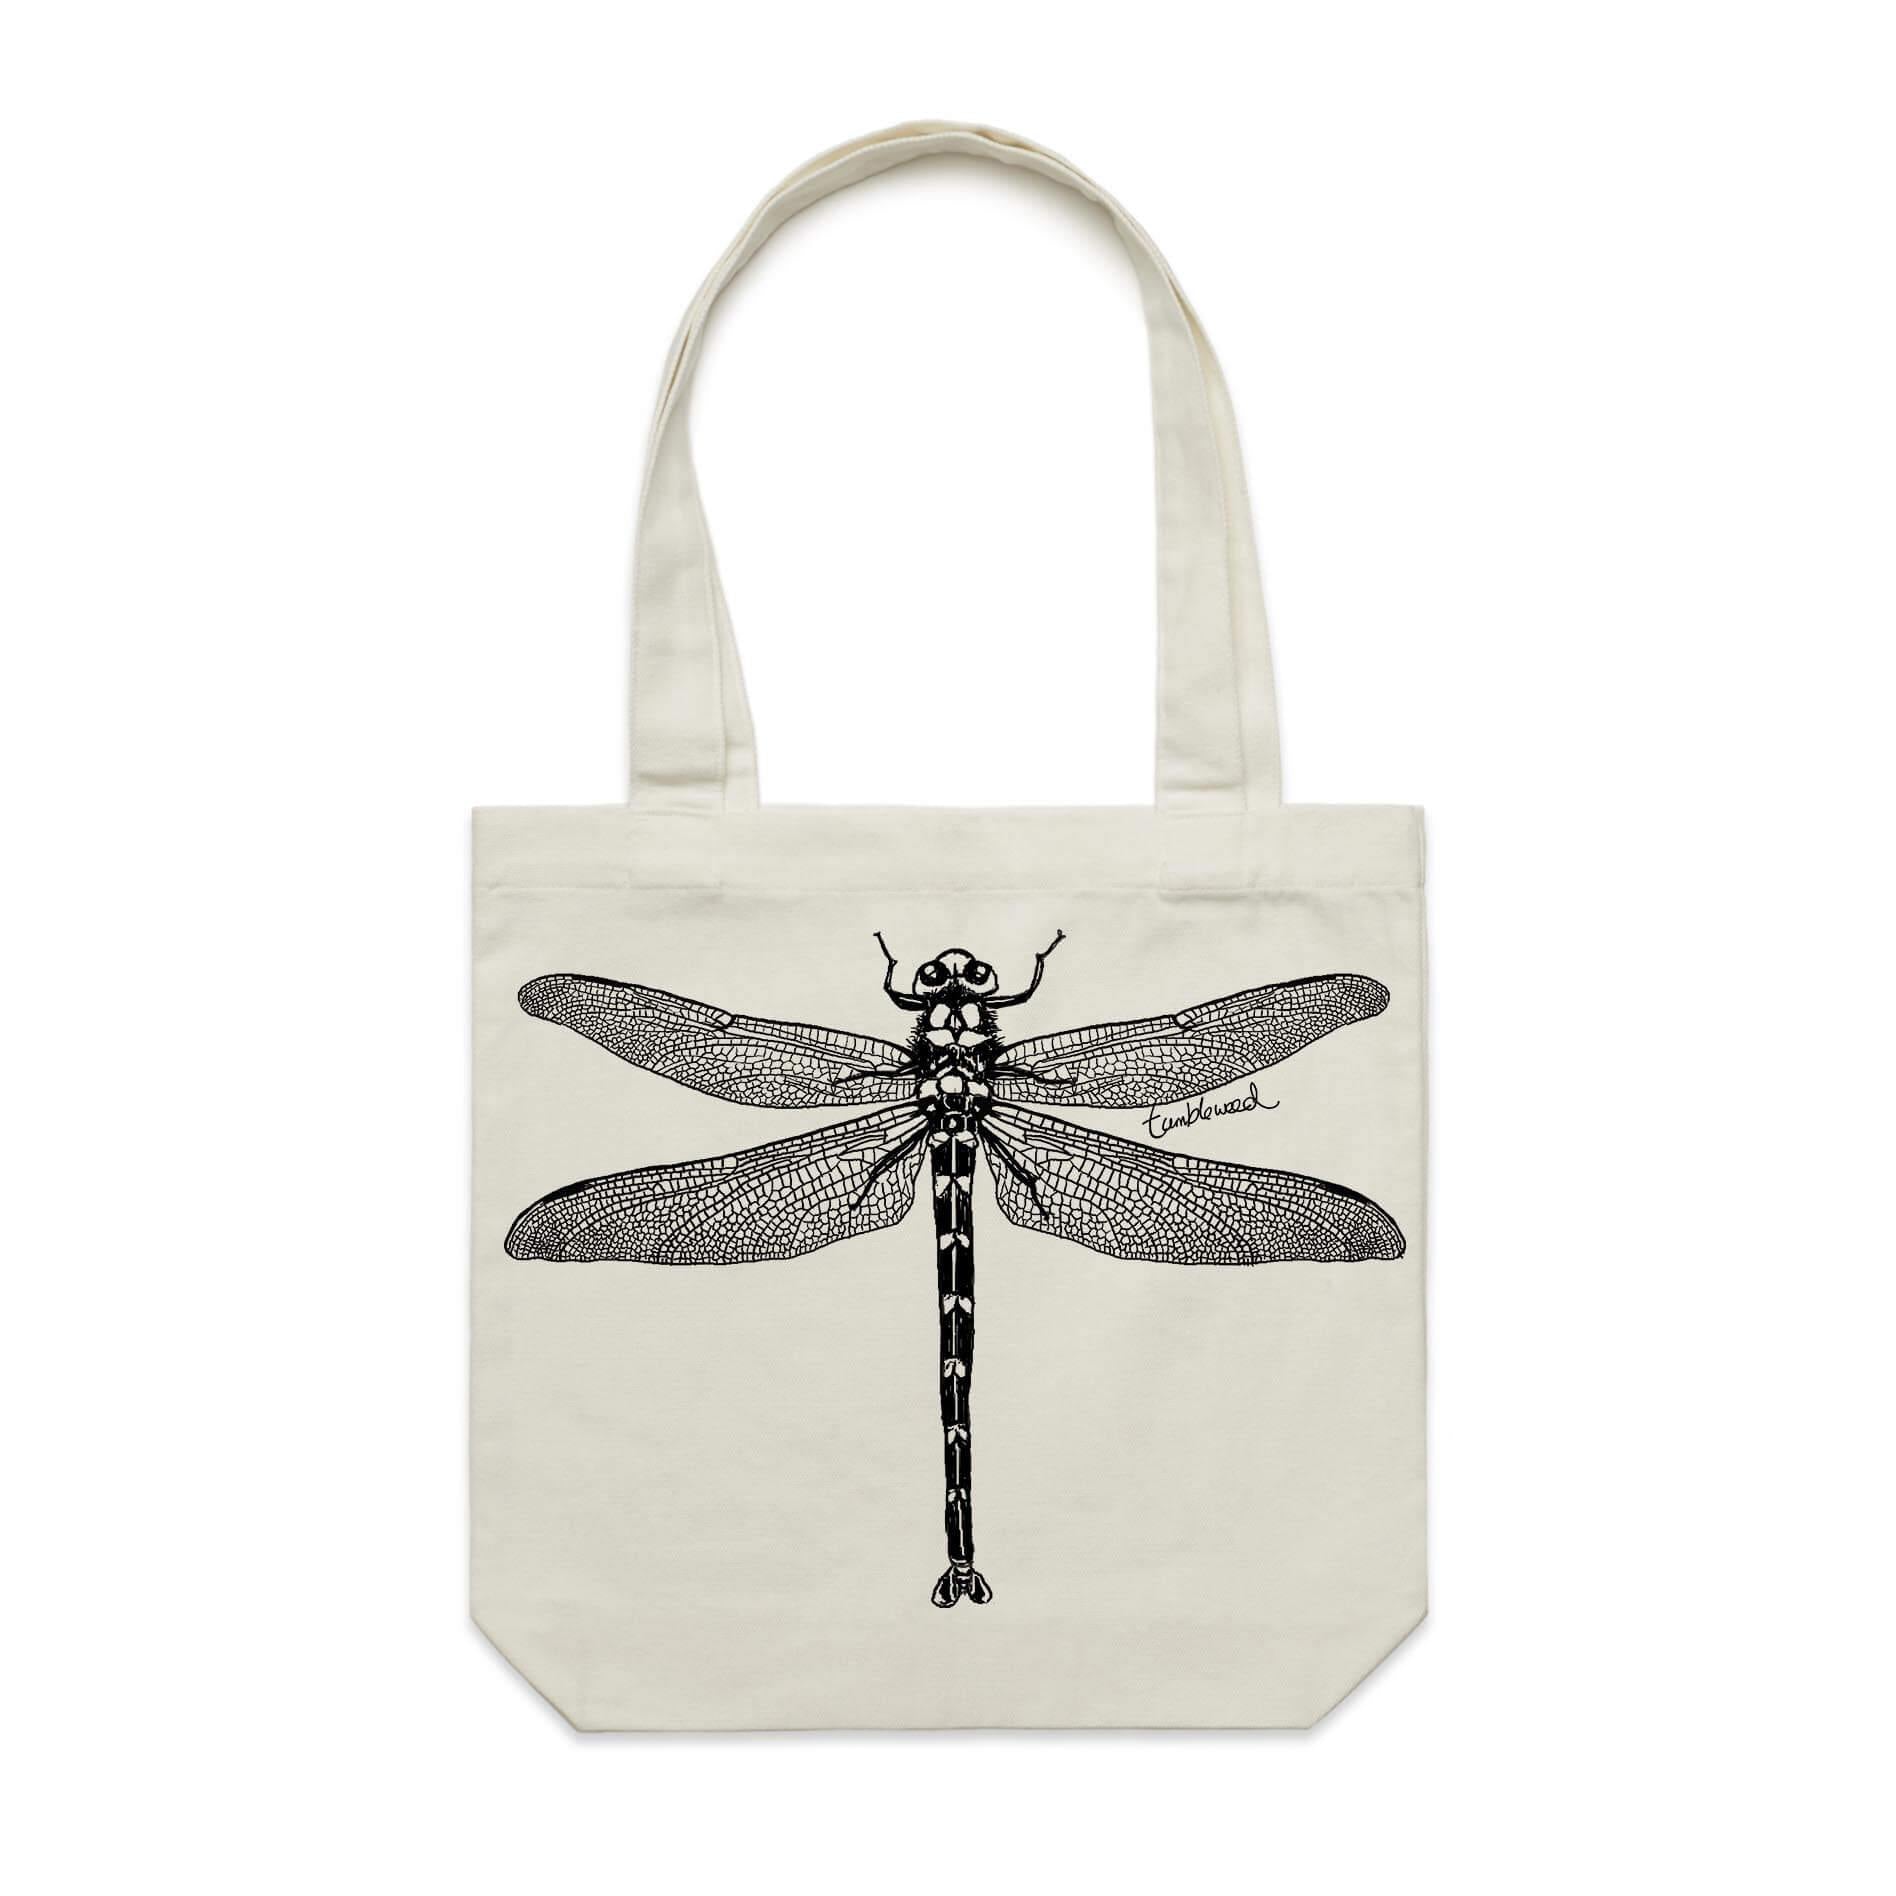 Buy Famame Dragonfly Canvas Tote Bag Large Women Casual Shoulder Bag Handbag  Reusable Multipurpose Shopping Grocery Bag For Outdoors at Amazon.in